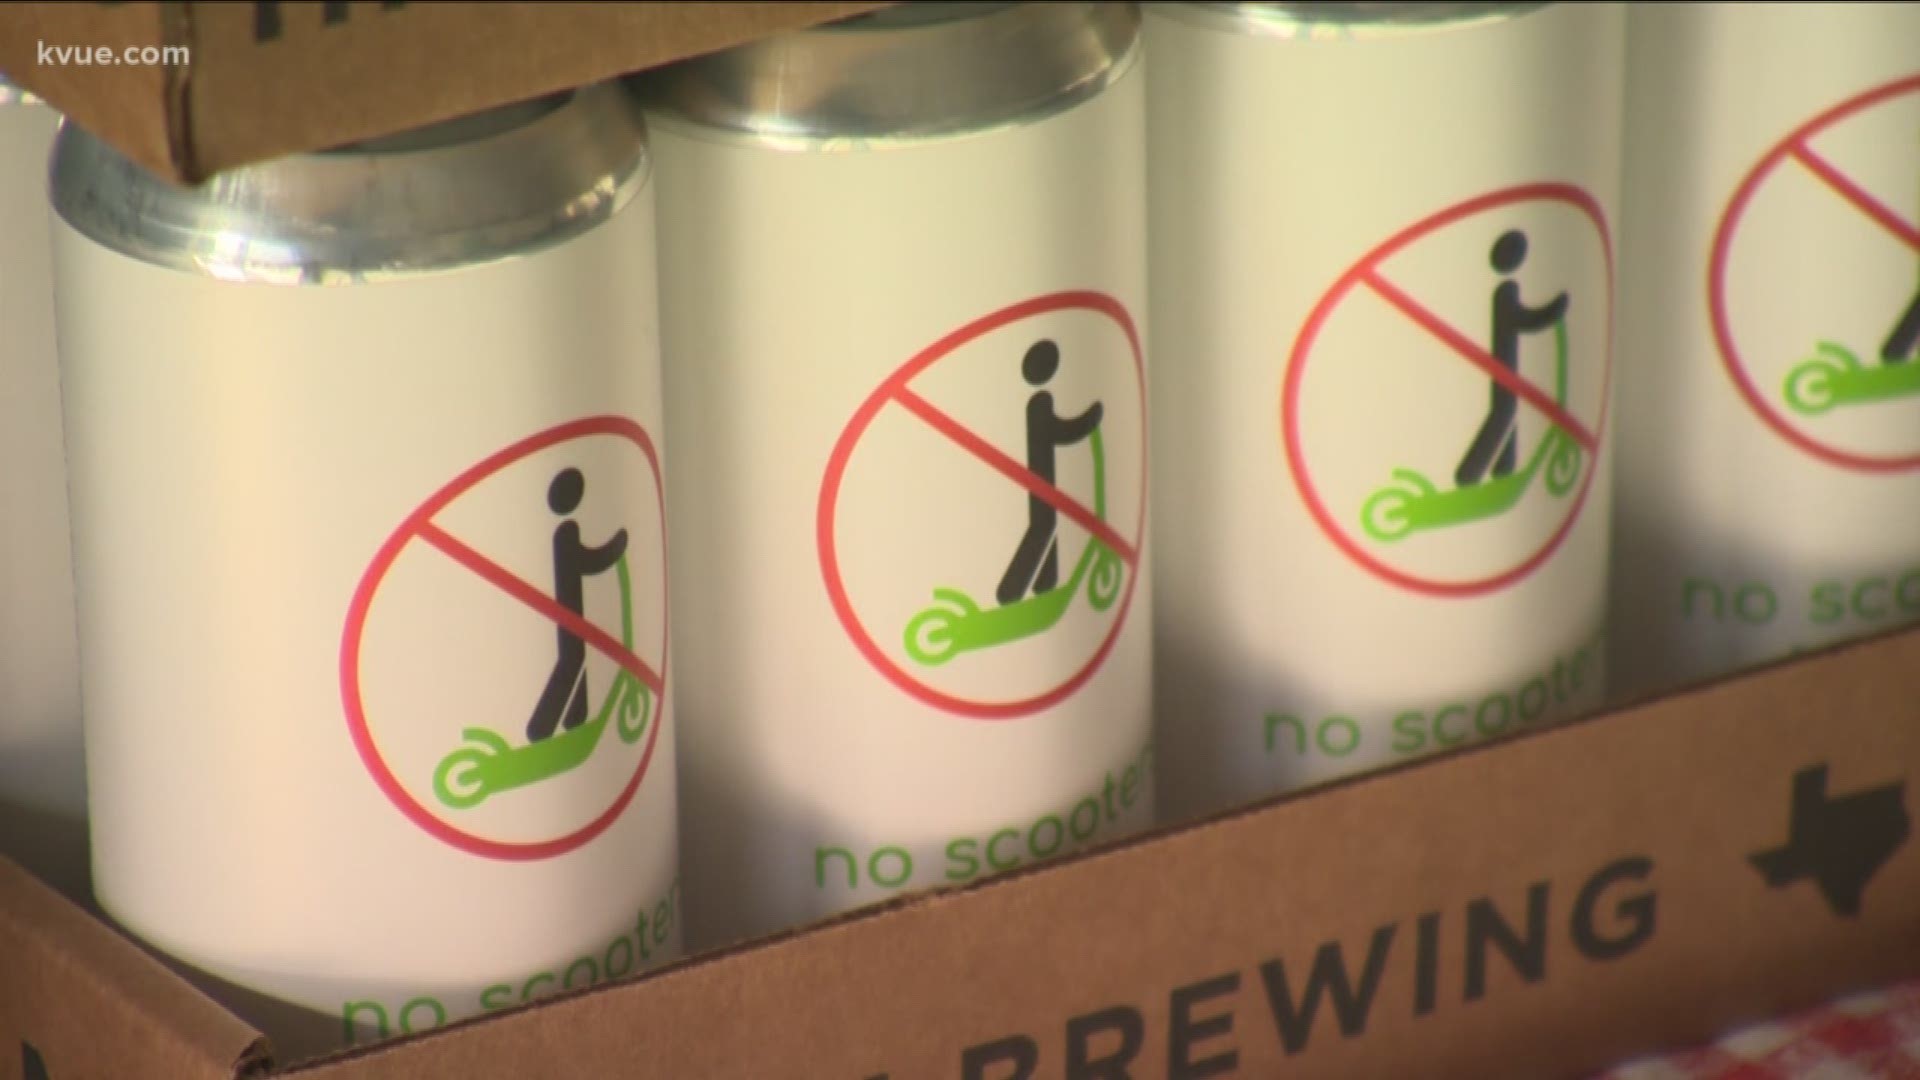 One local brewery is combining two things Austinites seem to love: craft beer and complaining about electric scooters.